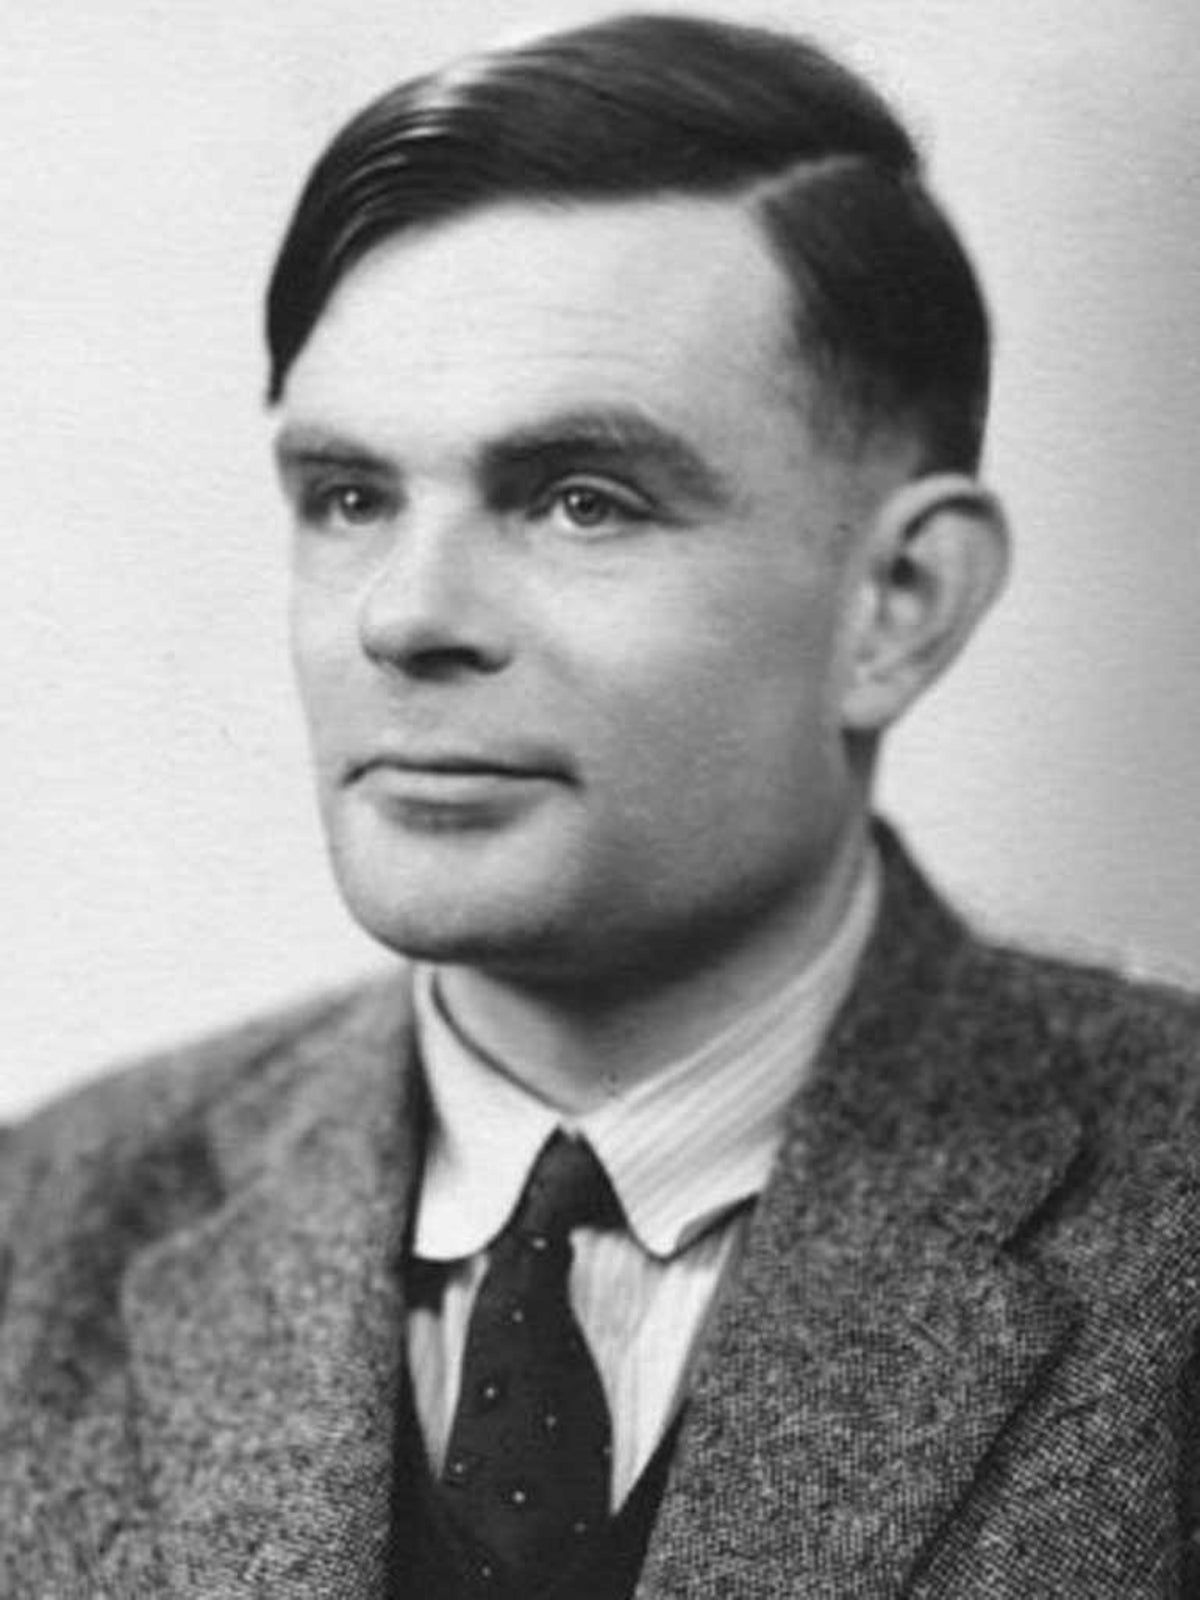 My great-uncle Alan Turing was just one of 49,000 gay men who had their  lives ruined by the Government — where are their pardons?, The Independent